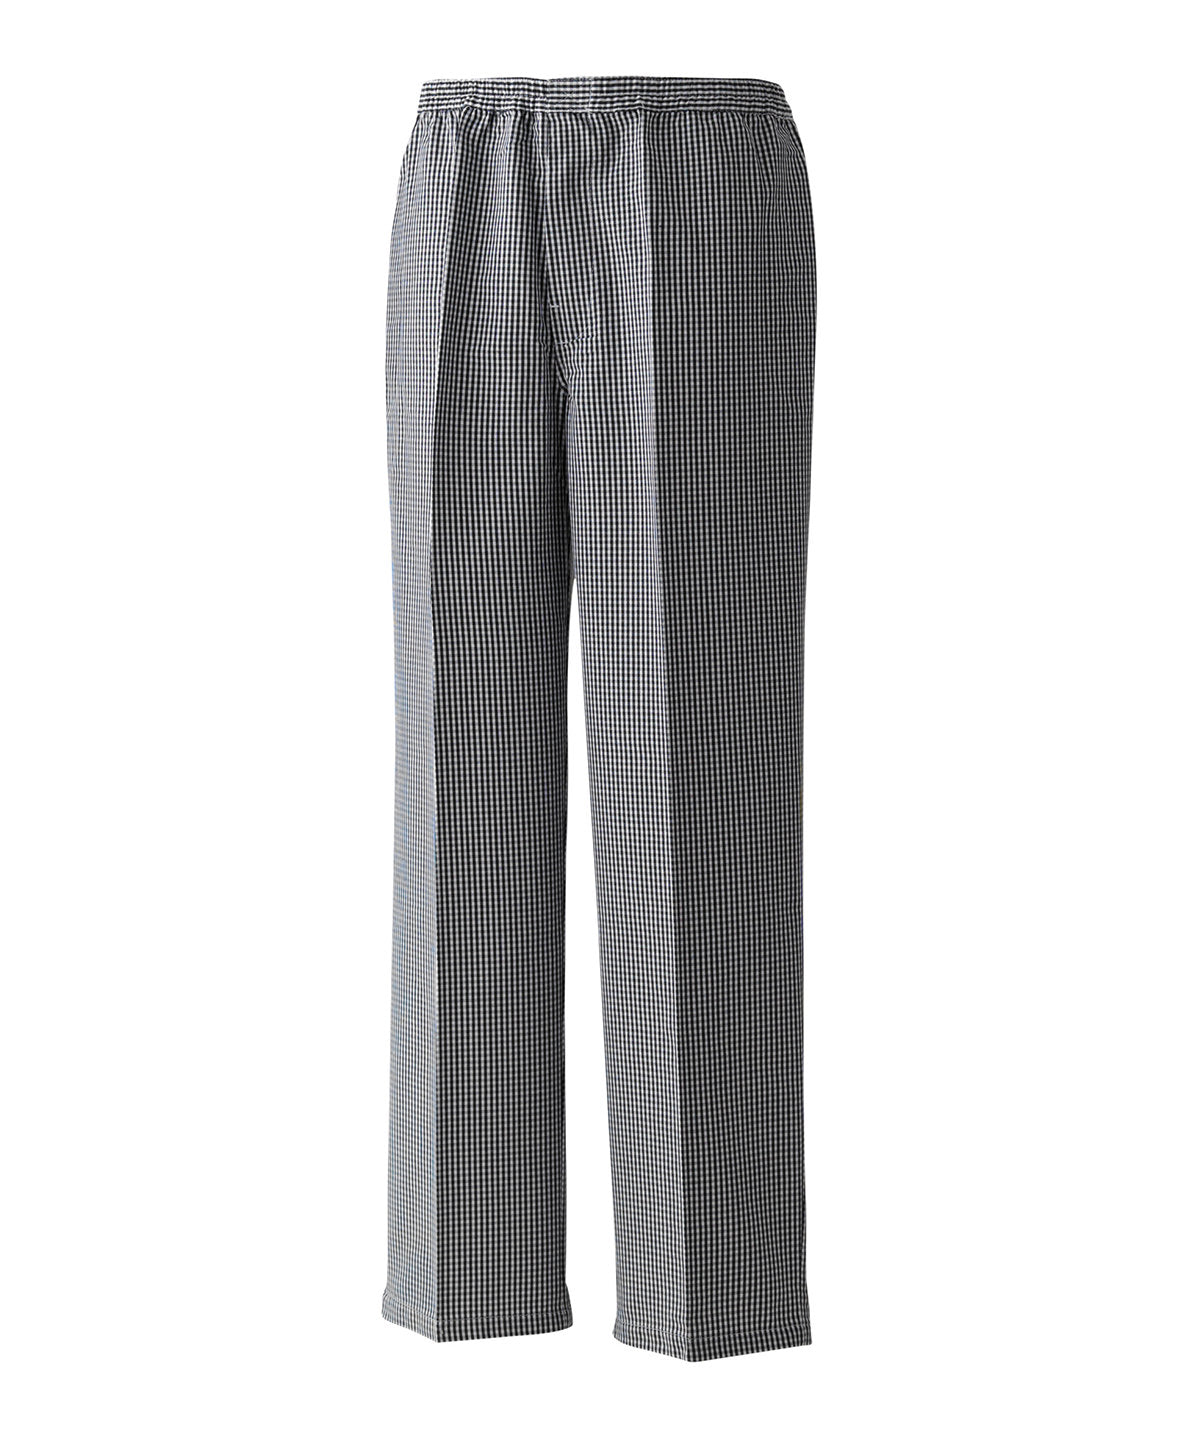 Premier Pull-on chef’s trousers